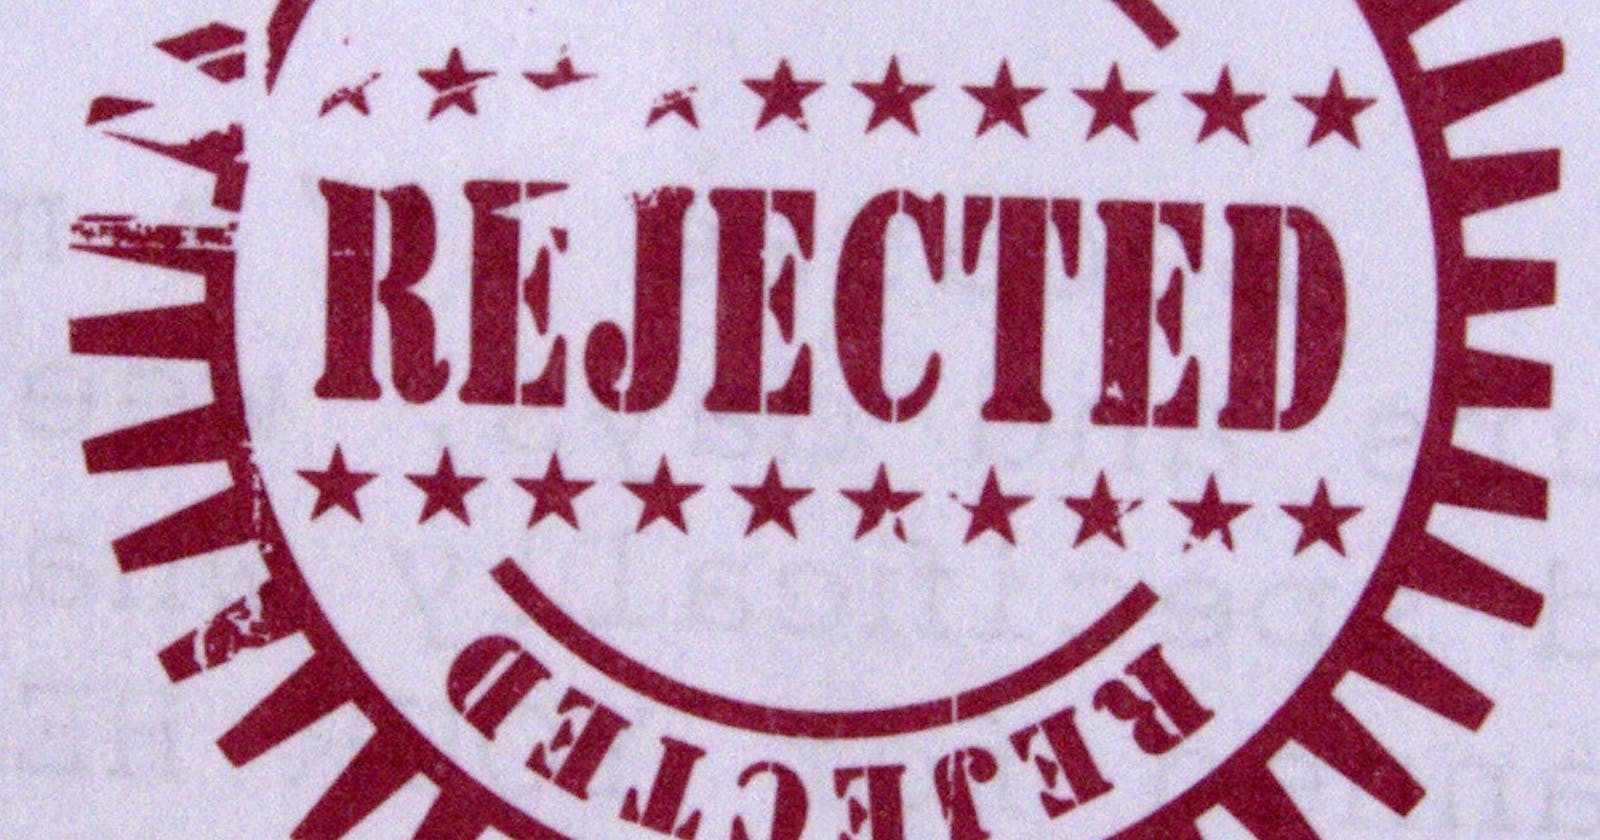 My Story got Rejected by Hackernoon